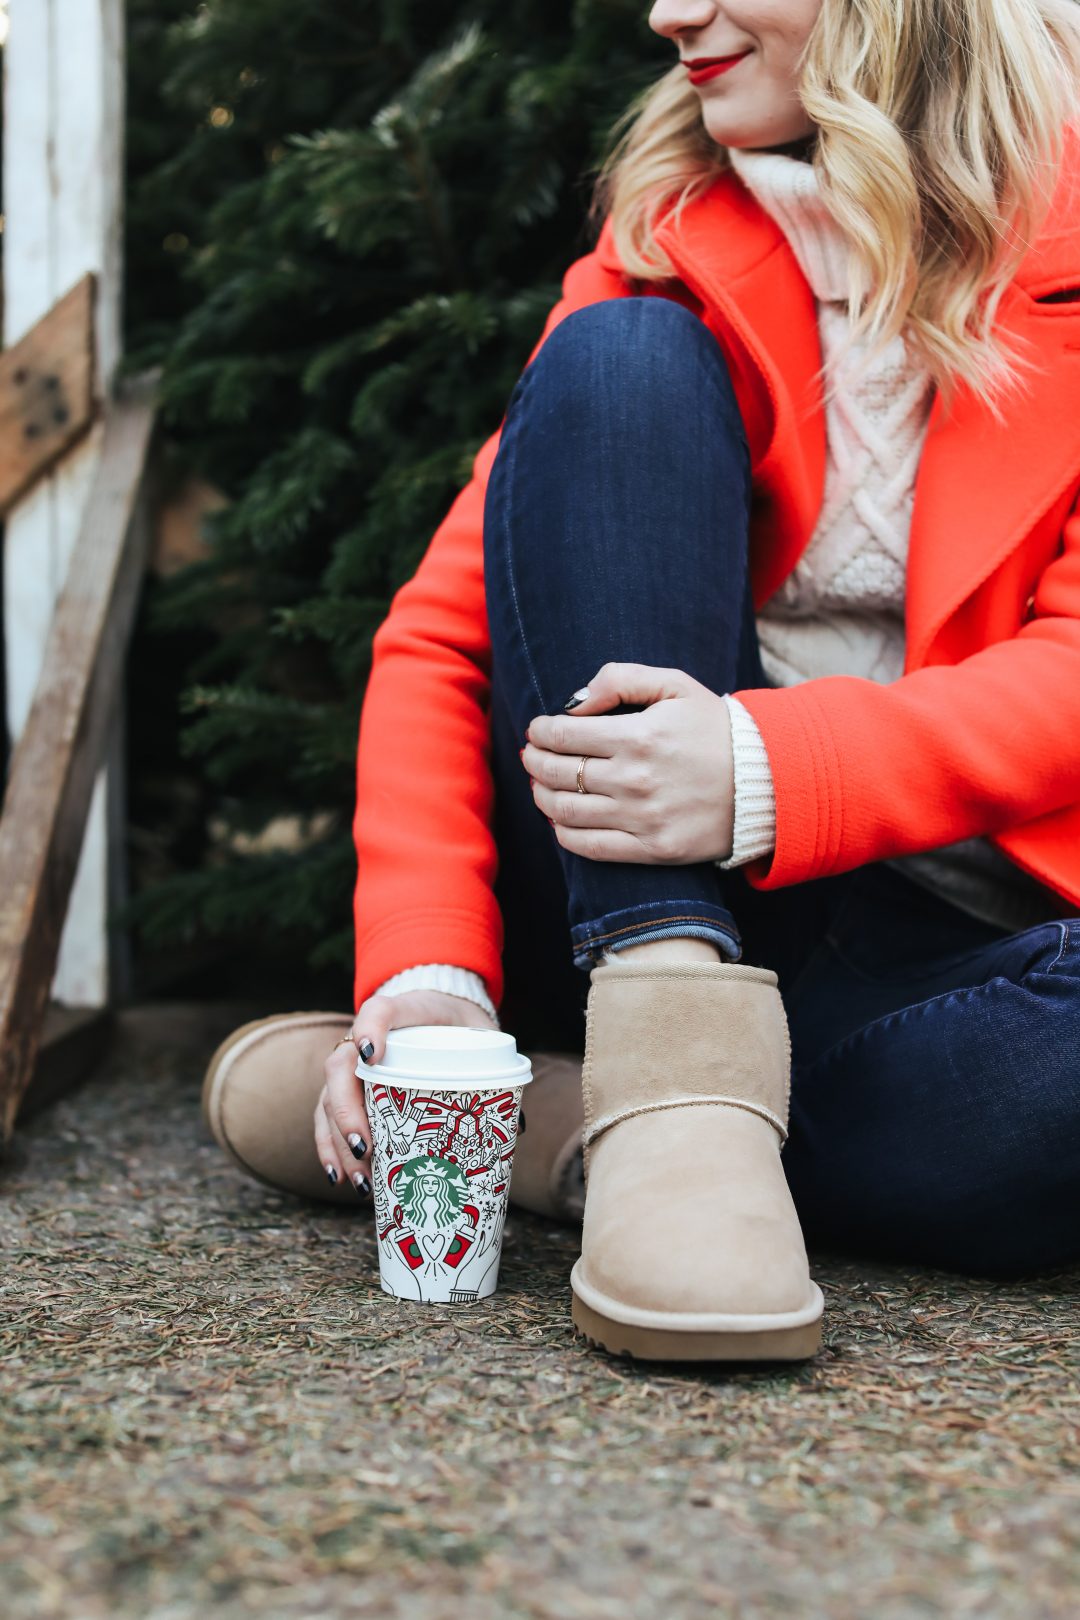 Feeling Festive in UGG Boots from Zappos.com.